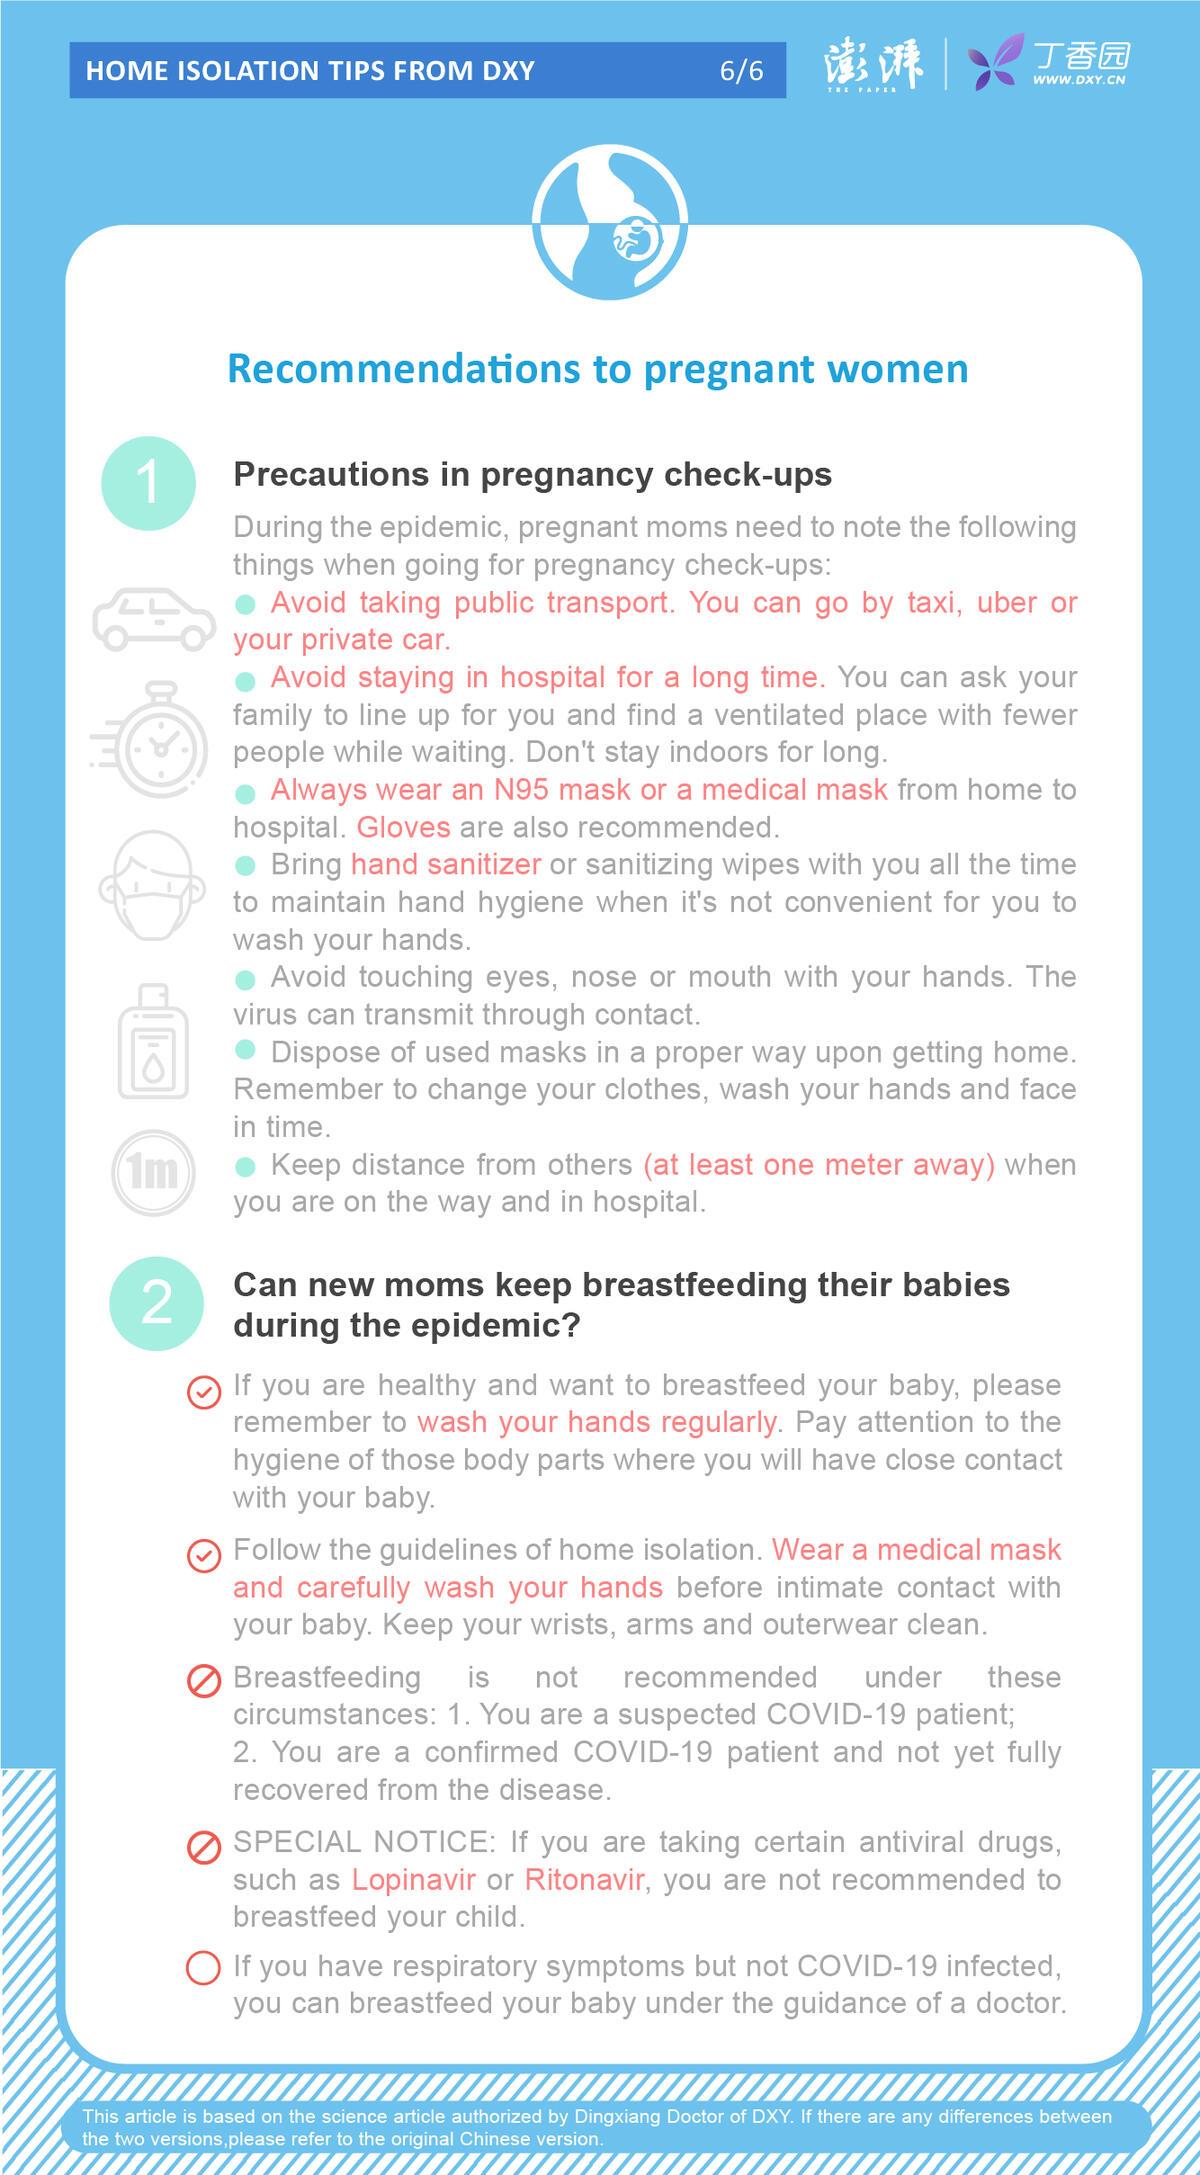 【COVID-19 Knowledge】Recommendations to pregnant women